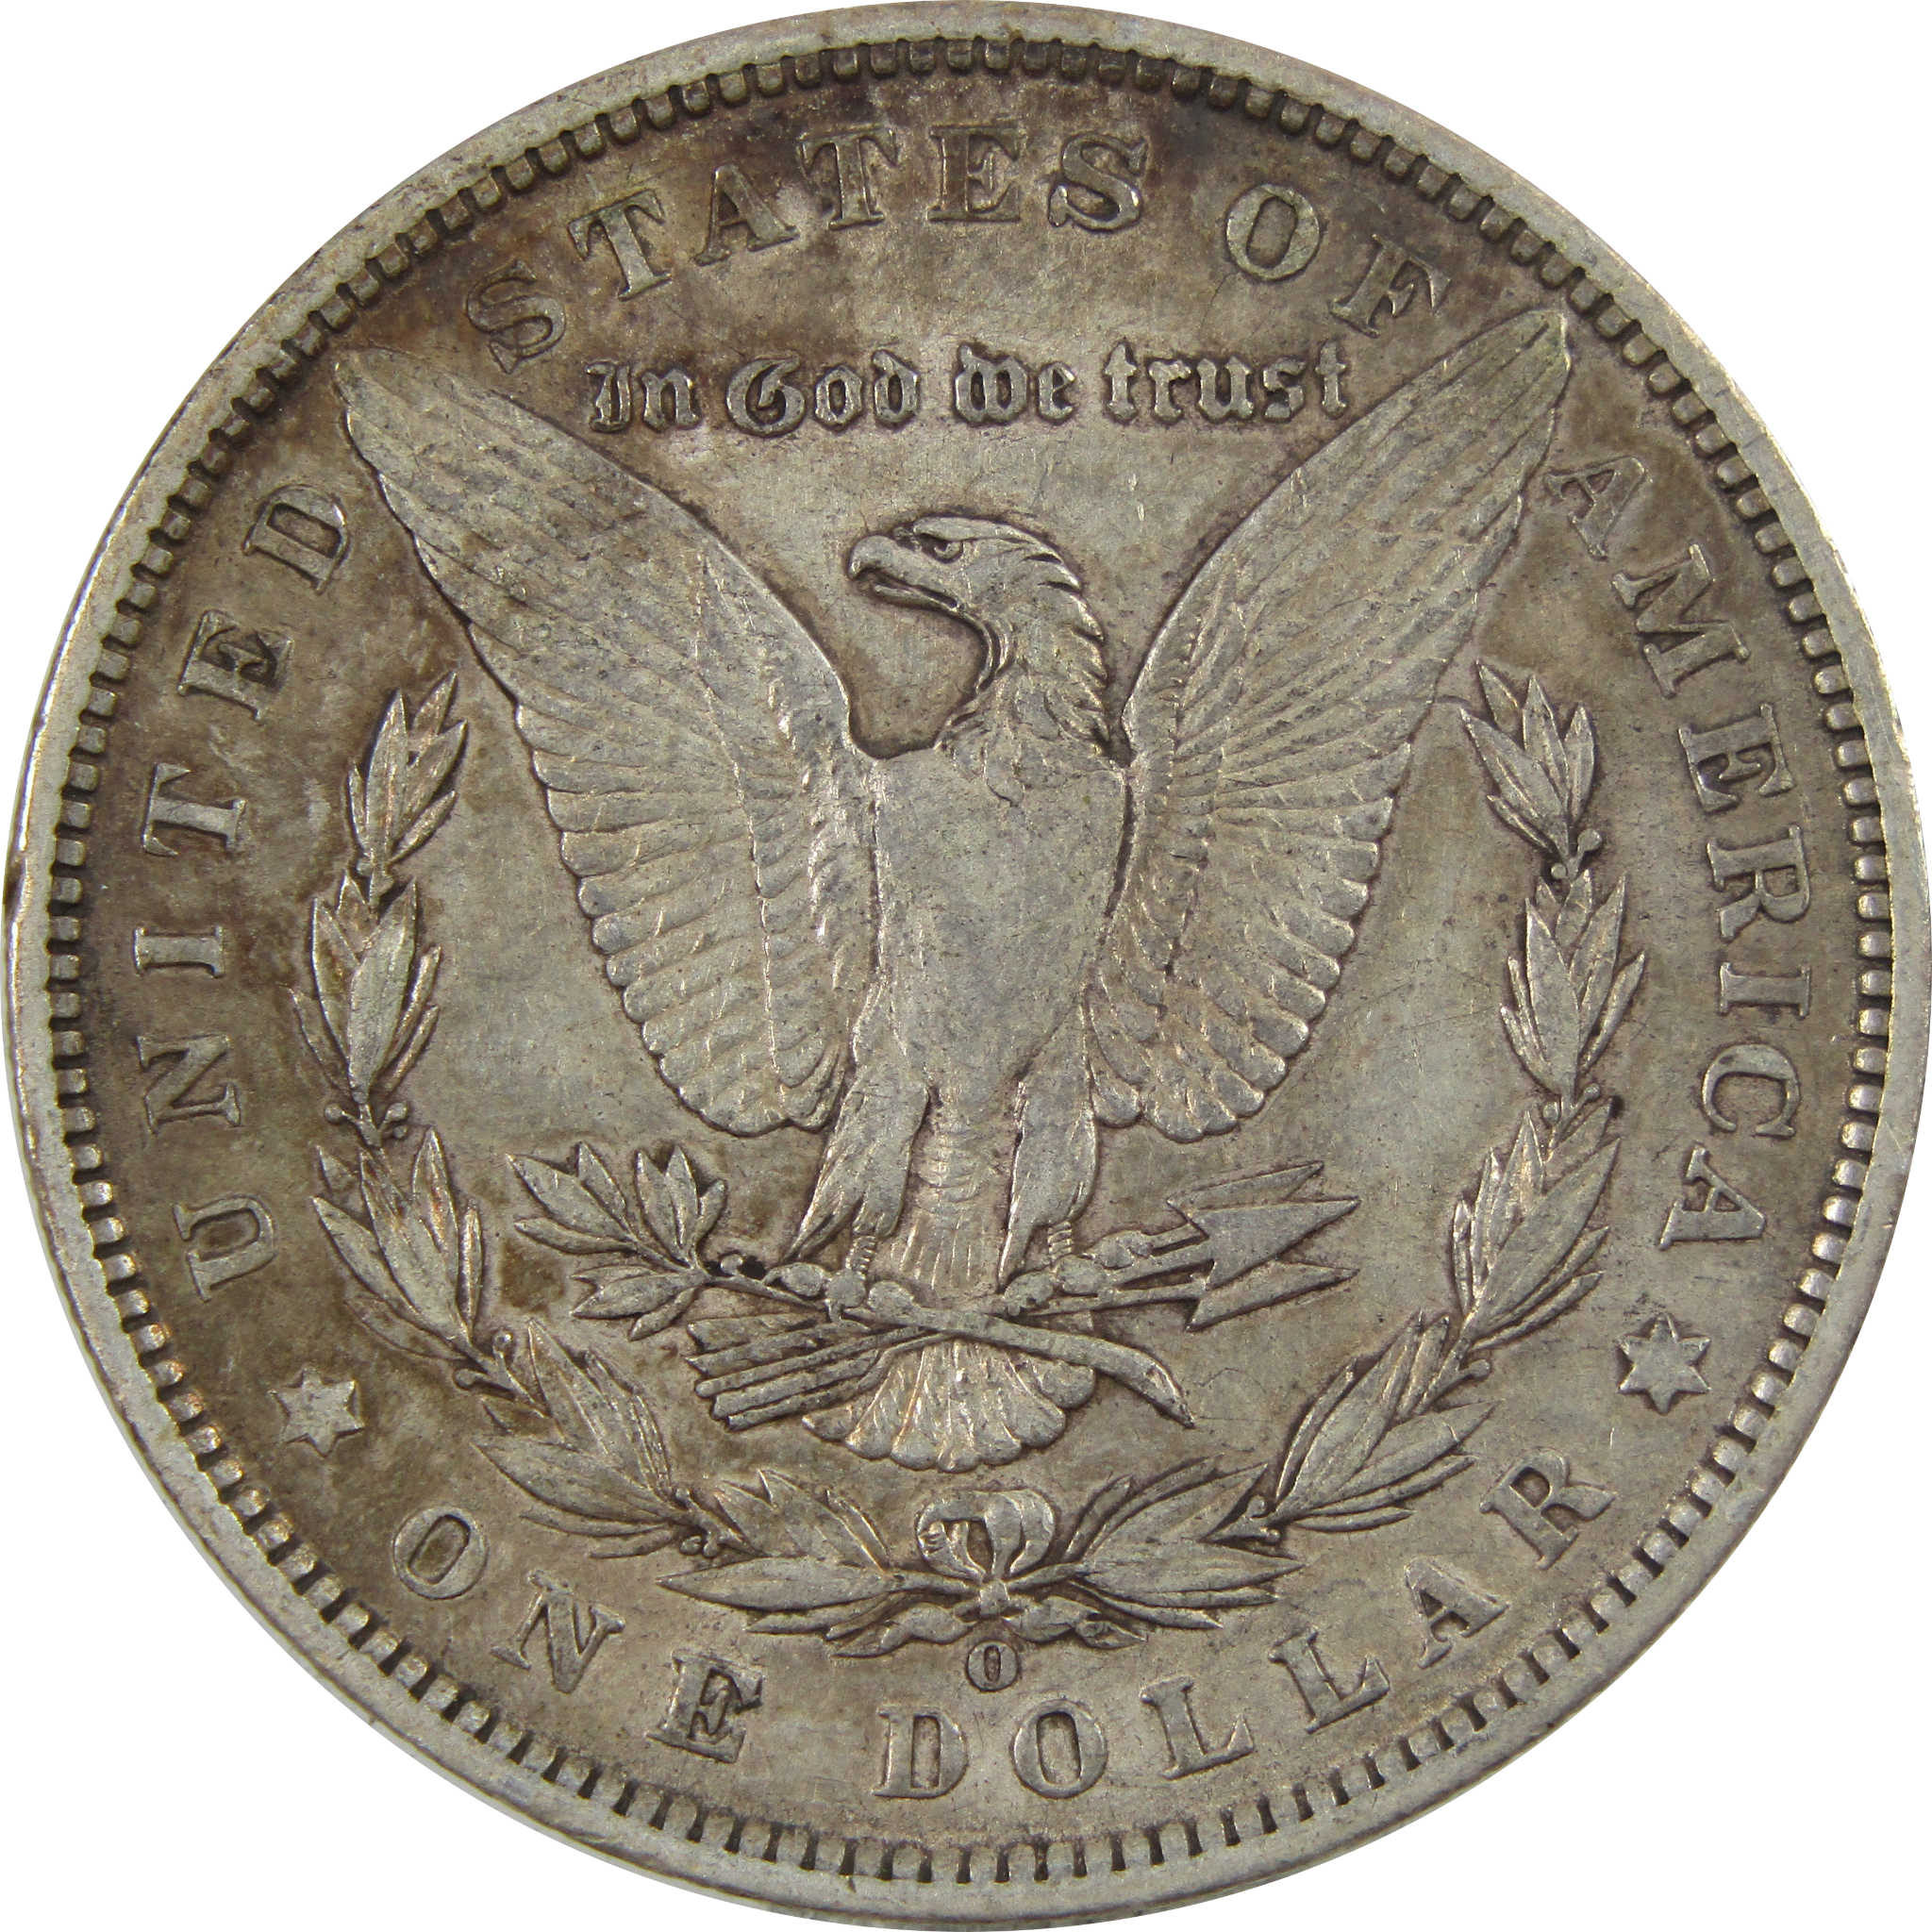 1886 O Morgan Dollar XF EF Extremely Fine 90% Silver $1 Coin SKU:I5078 - Morgan coin - Morgan silver dollar - Morgan silver dollar for sale - Profile Coins &amp; Collectibles